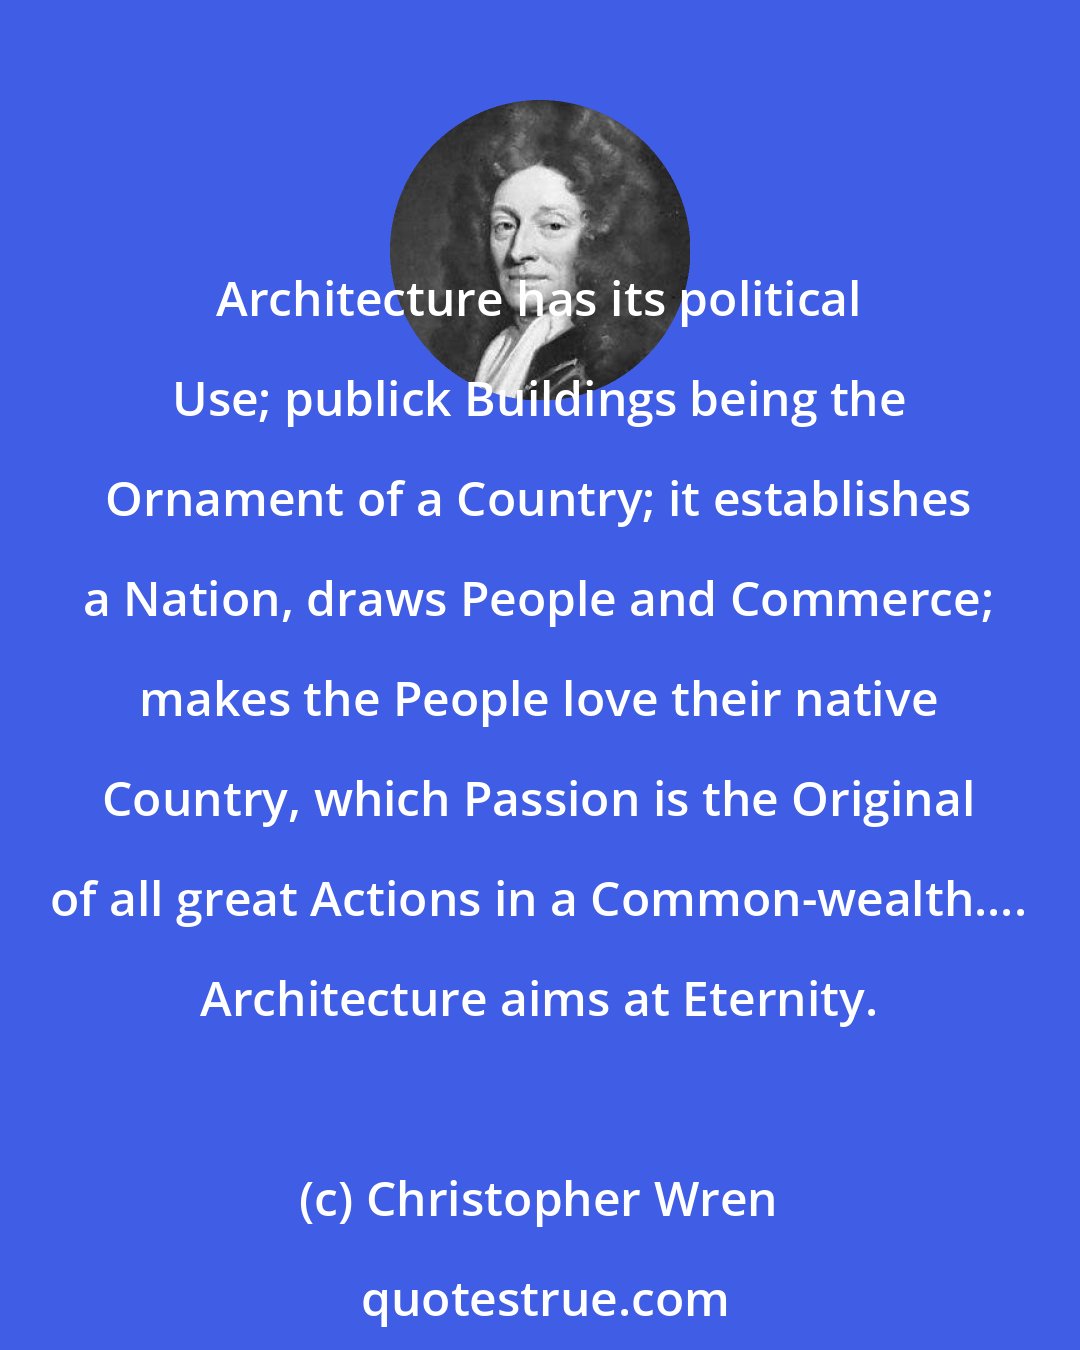 Christopher Wren: Architecture has its political Use; publick Buildings being the Ornament of a Country; it establishes a Nation, draws People and Commerce; makes the People love their native Country, which Passion is the Original of all great Actions in a Common-wealth.... Architecture aims at Eternity.